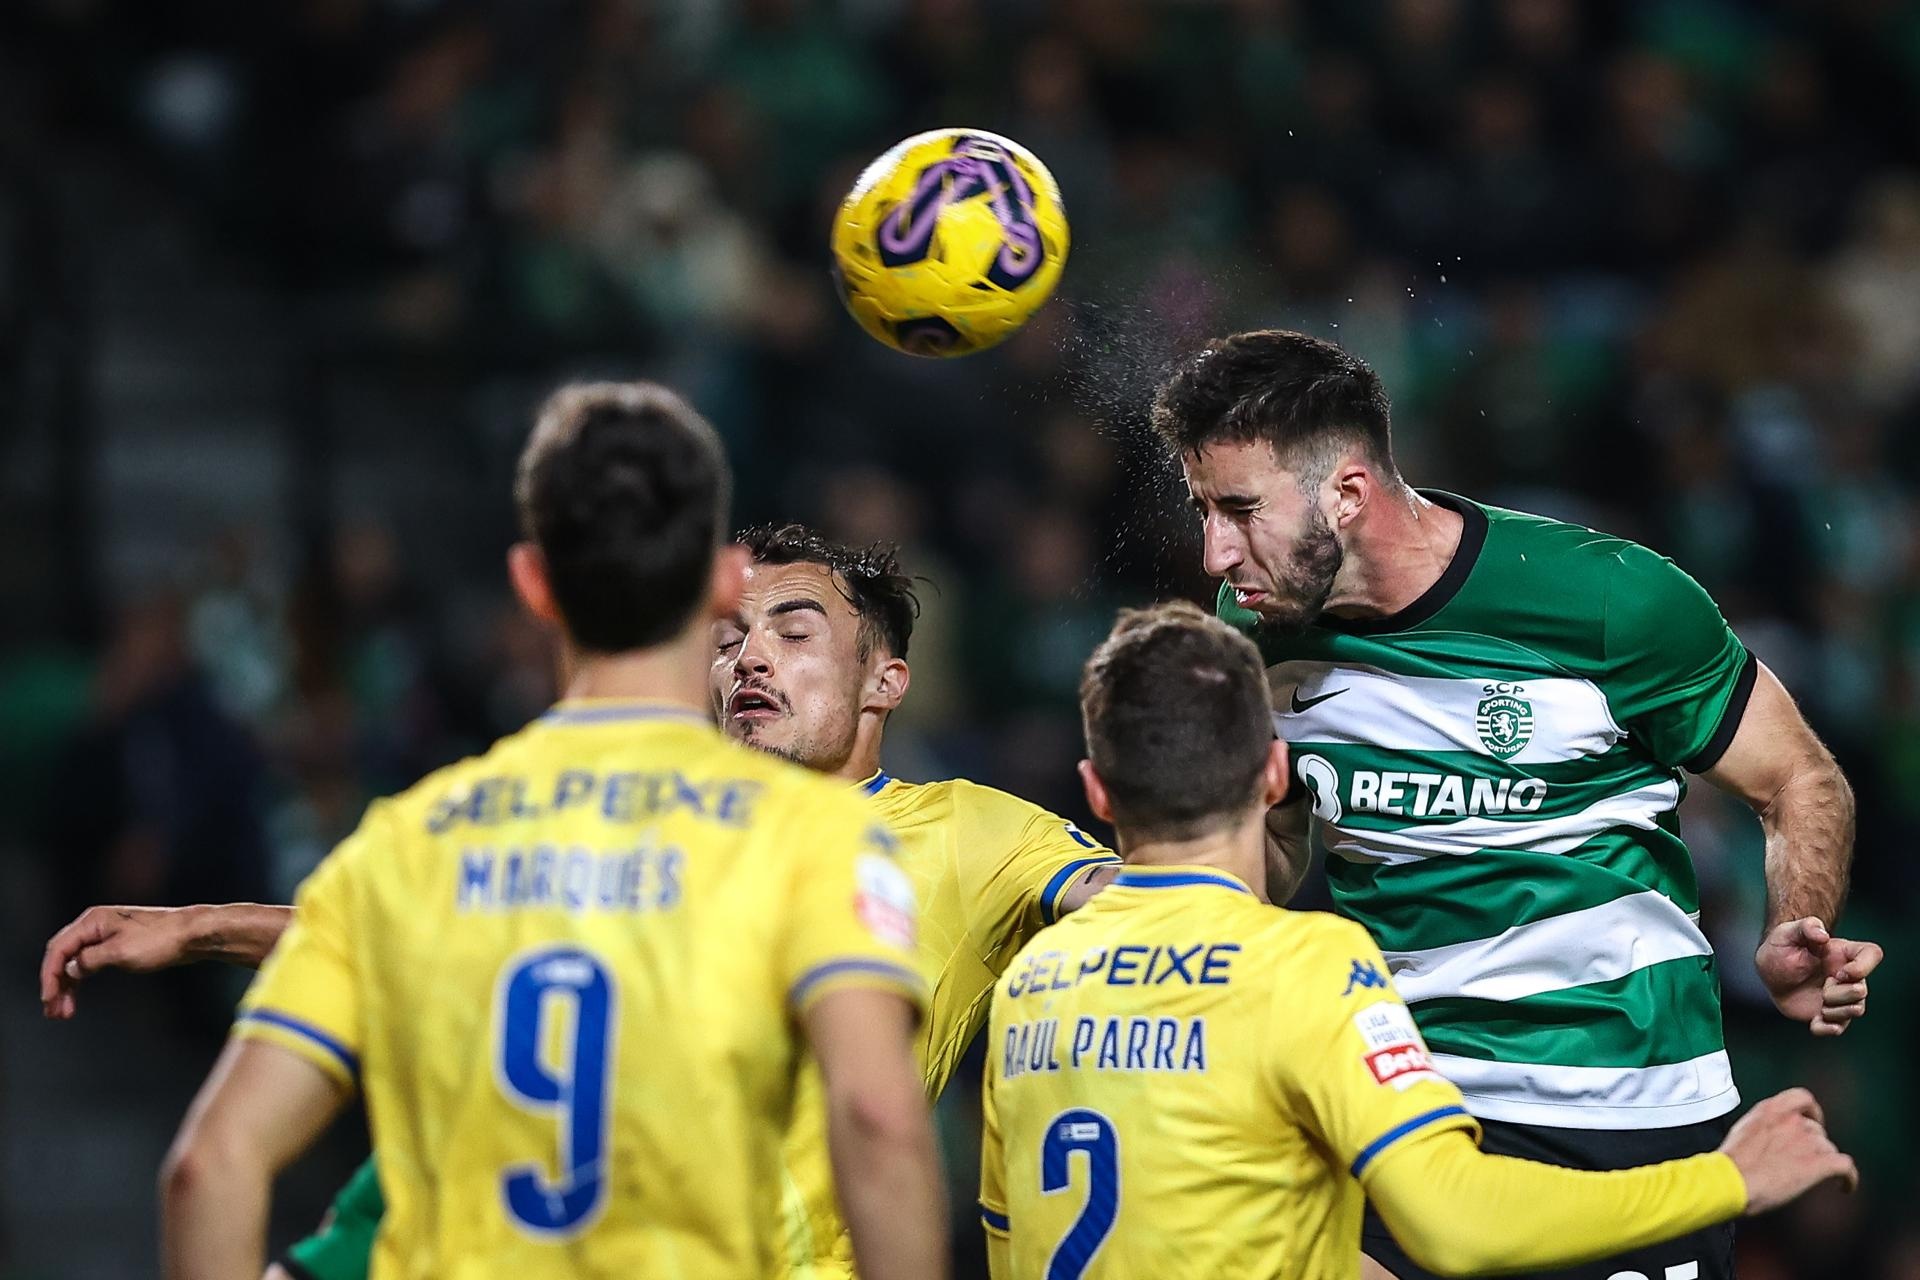 Liverpool and Manchester United have Sporting CP centre-back Goncalo Inacio, whose termination clause is 60 million euros, on their radar, as reported by Fabrizio Romano.